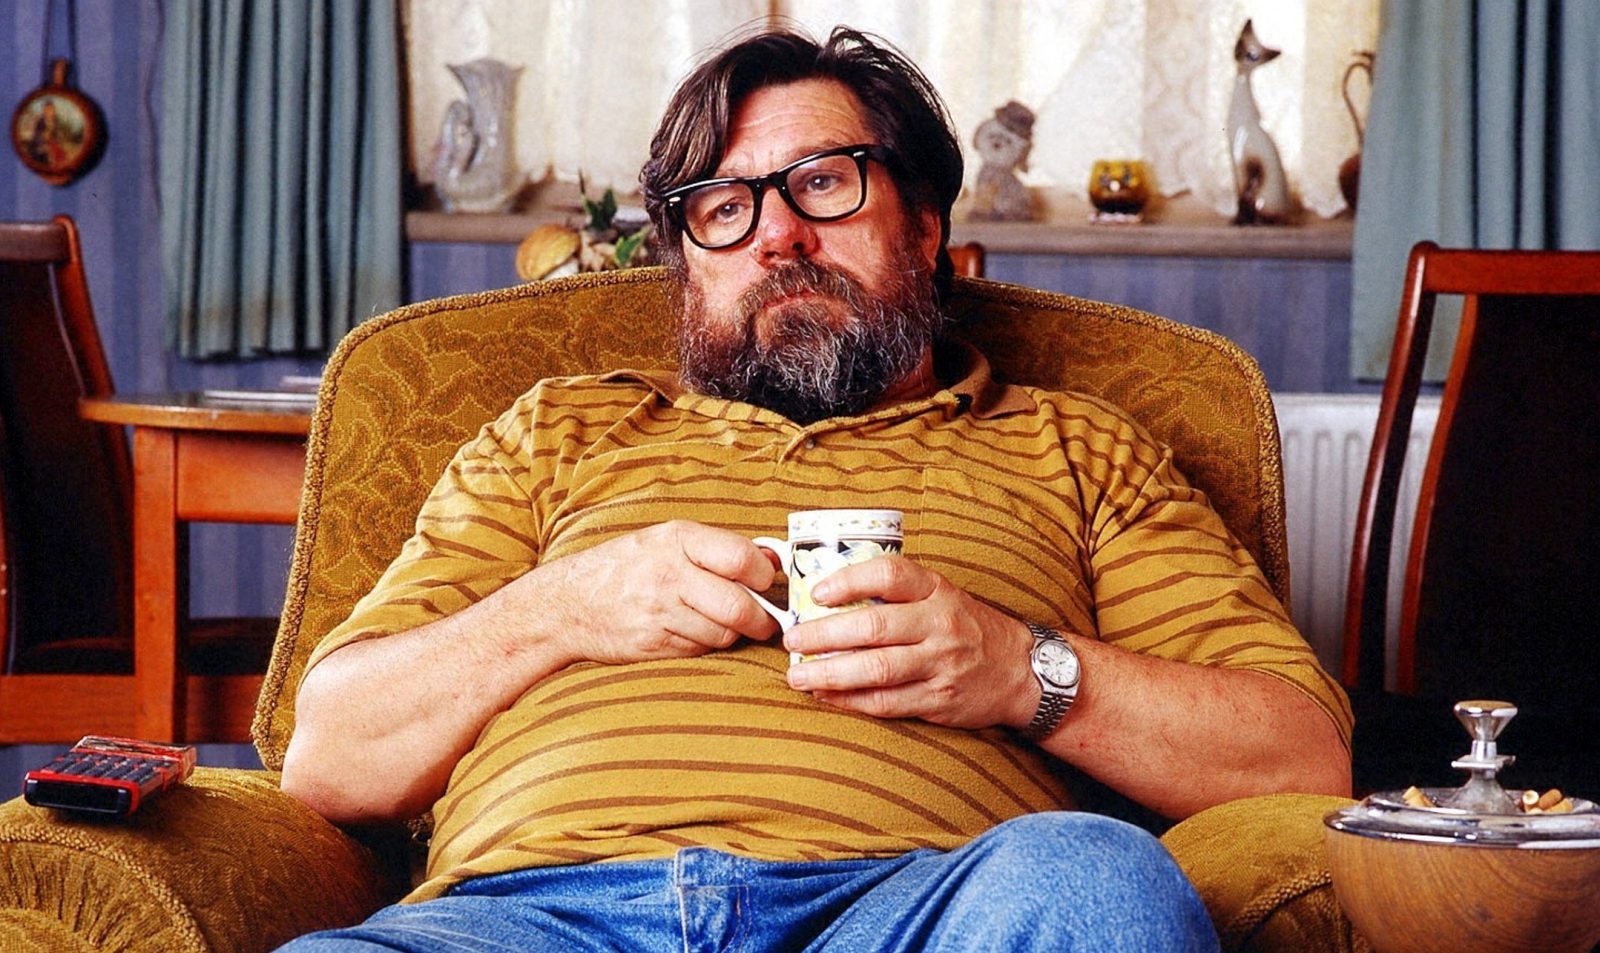 The Royle family returns tonight with a unique 25th anniversary special 2